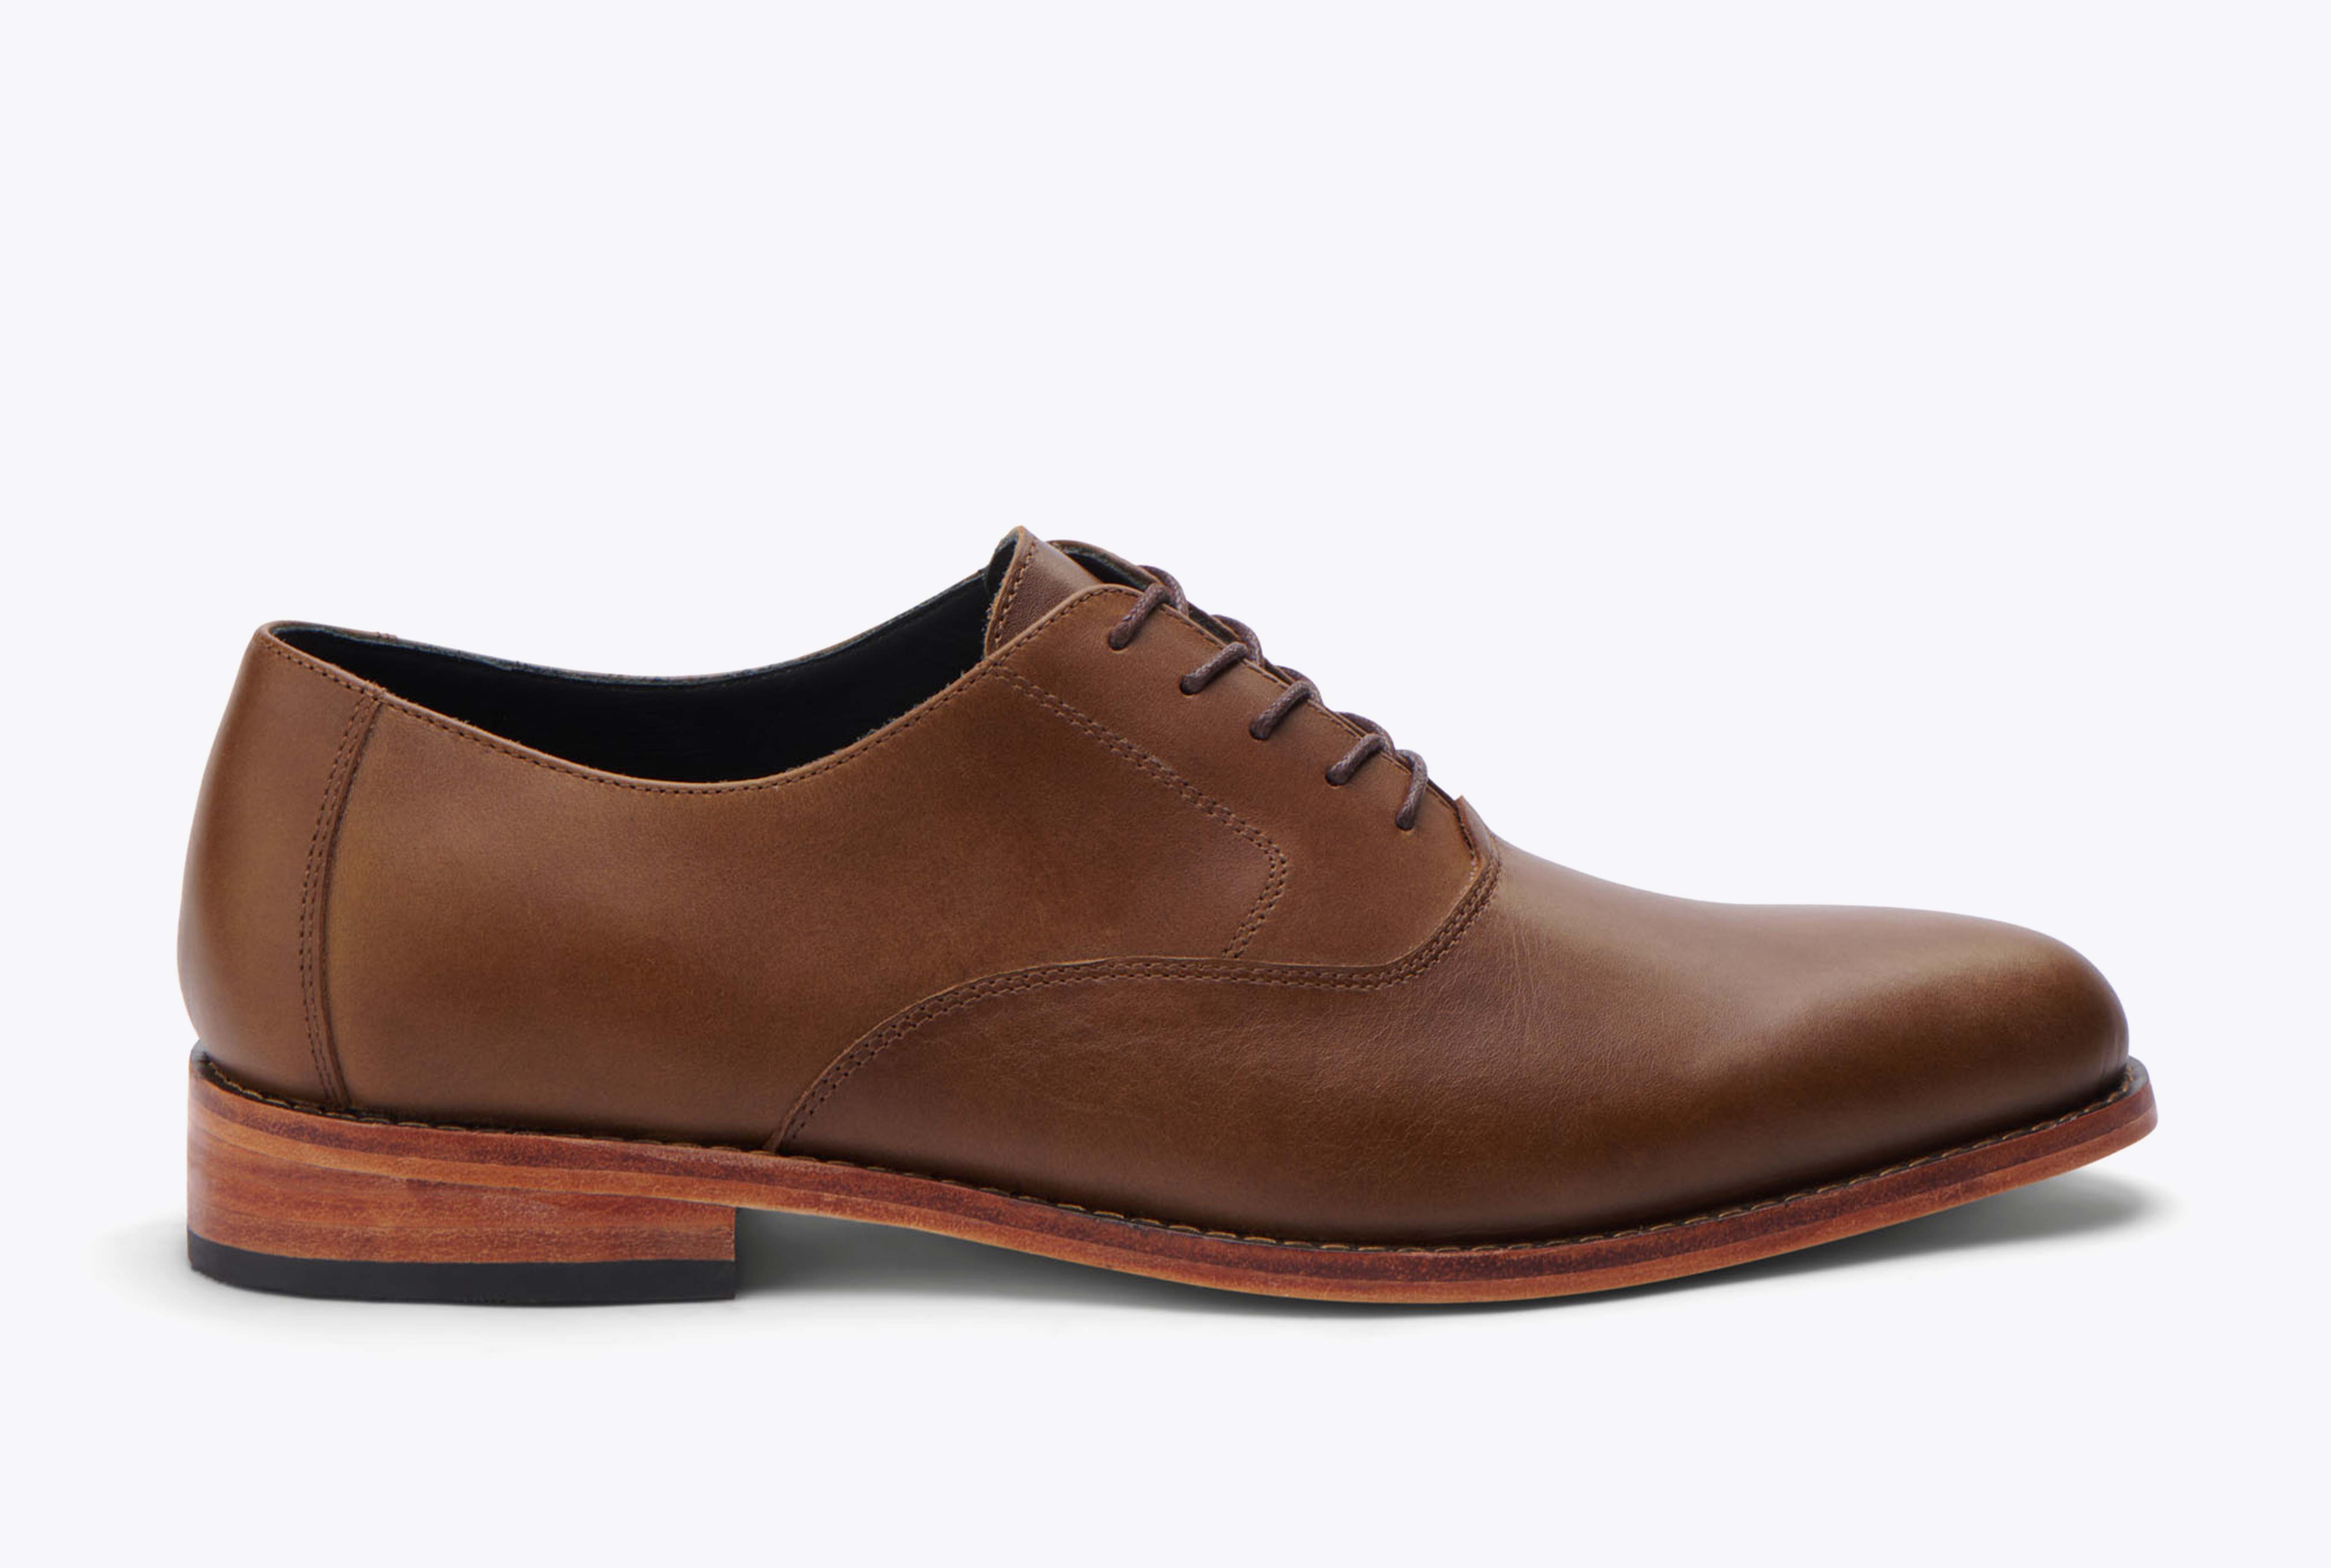 Nisolo Calano Oxford Brown - Every Nisolo product is built on the foundation of comfort, function, and design. 